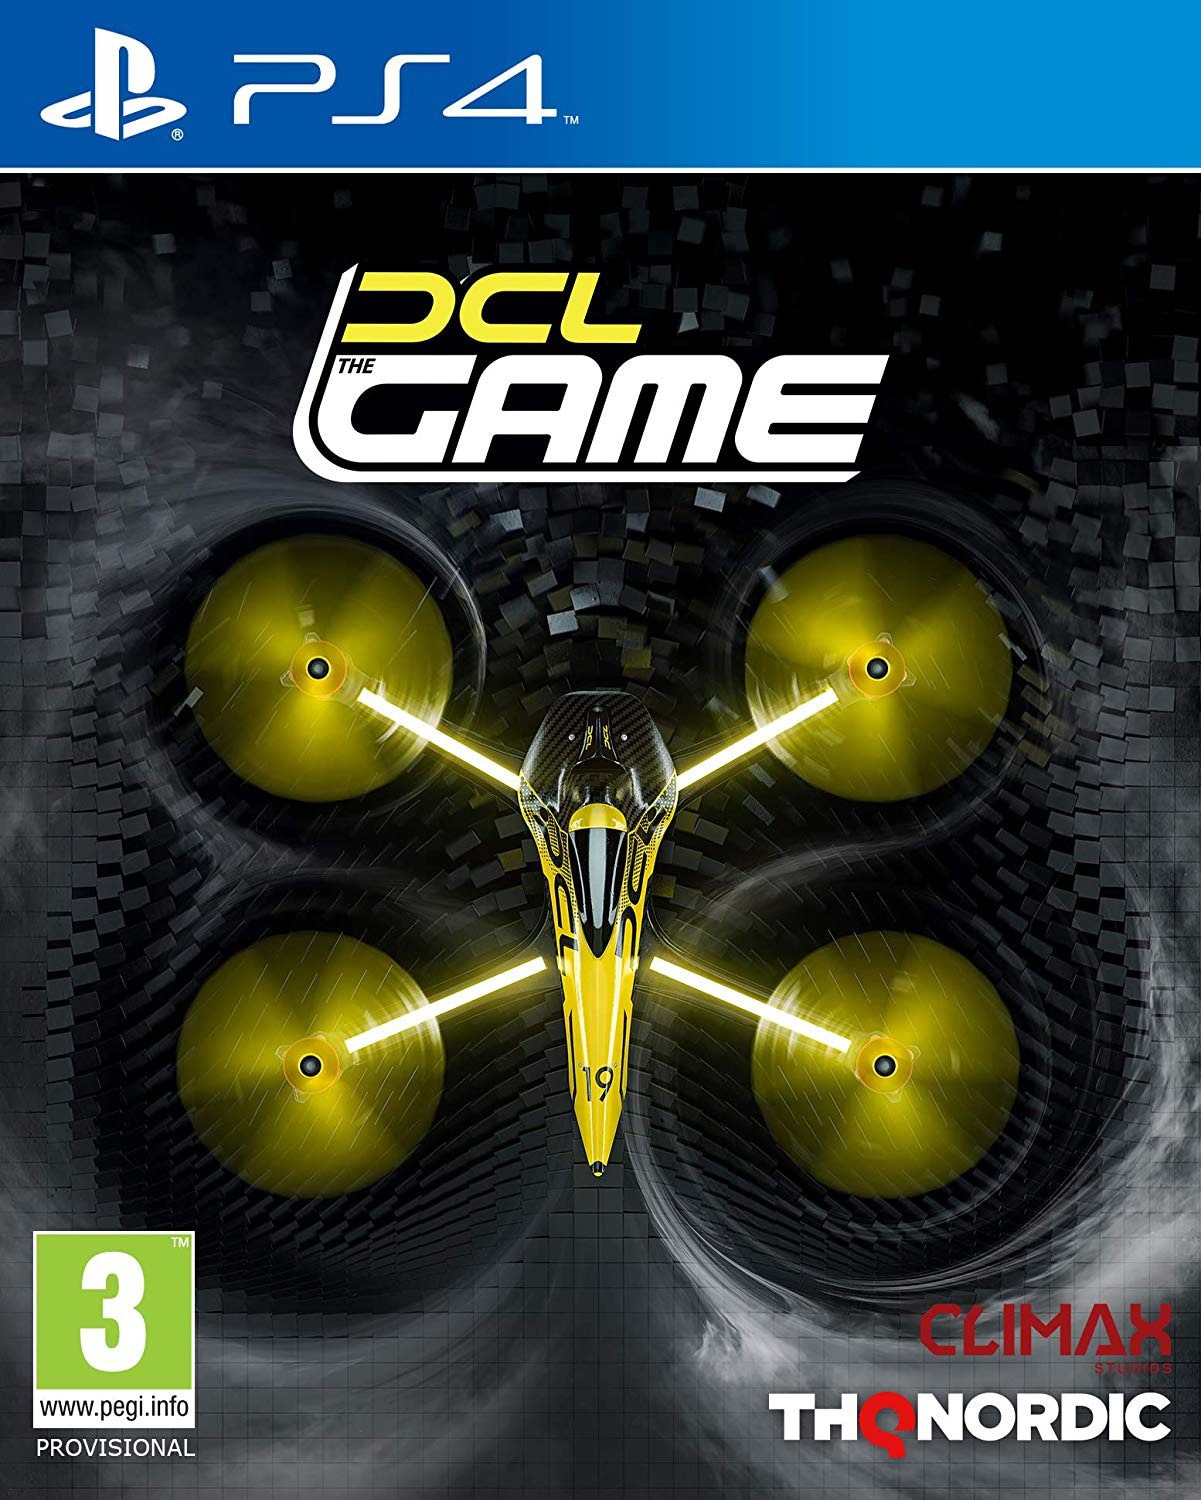 DCL The Game [PS4] 5.05 / 6.72 / 7.02 [USA] (2020) [Русский] (v1.01)